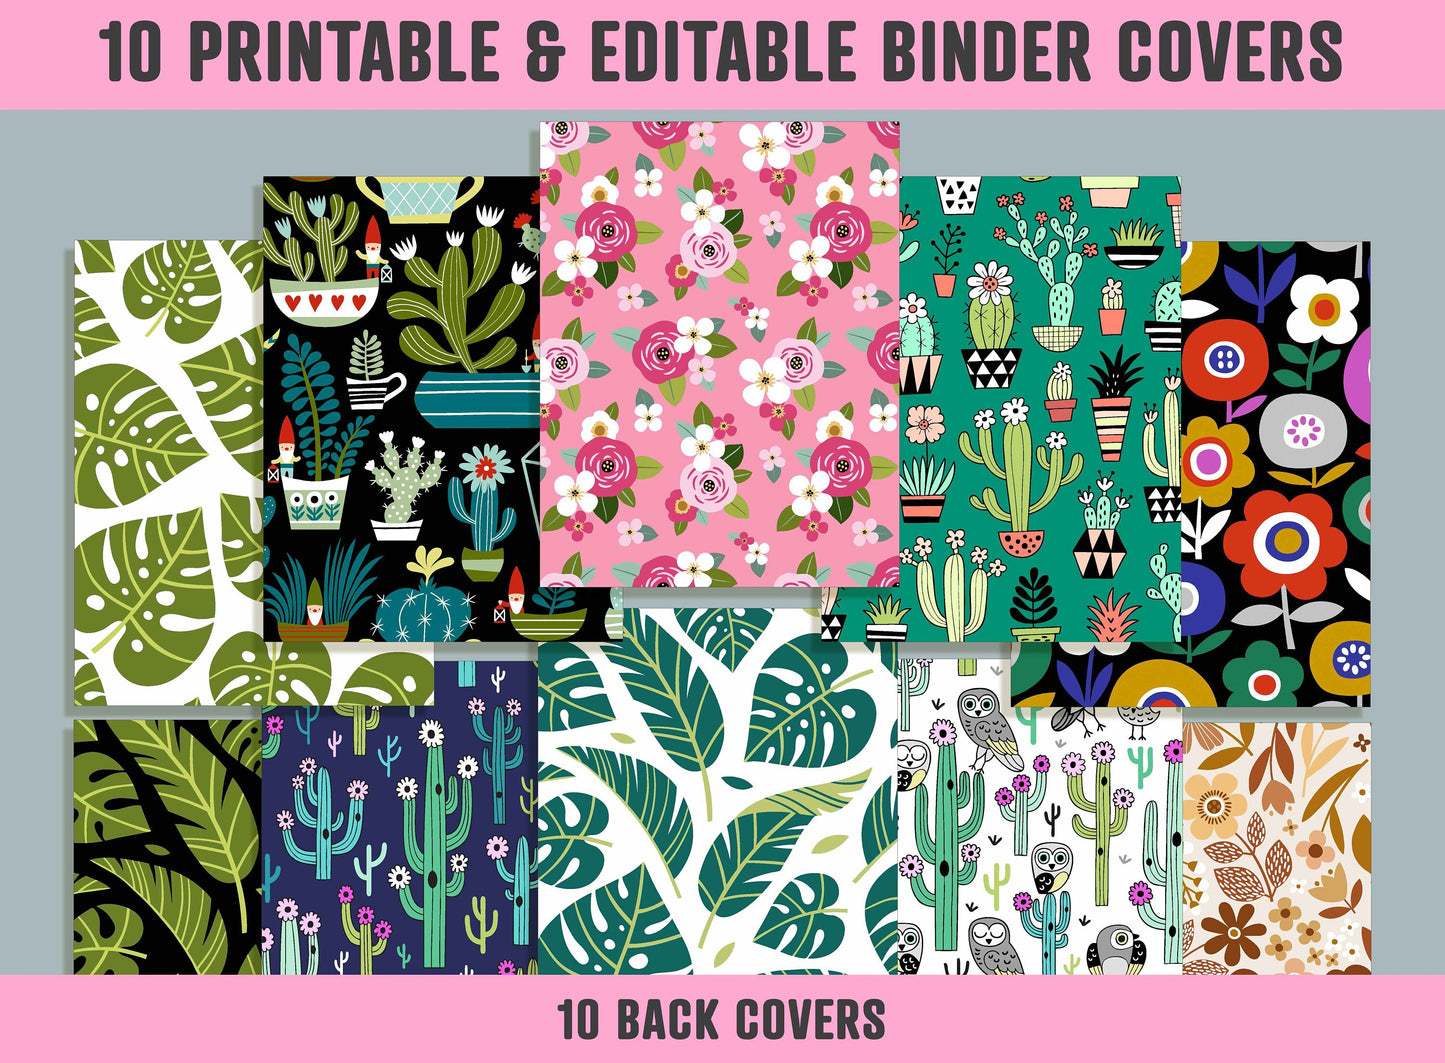 Flowers, Palm Leaves, Cactuses Binder Cover, 10 Printable/Editable Binder Covers+Spines, Binder Inserts, Planner Template for Teacher/School